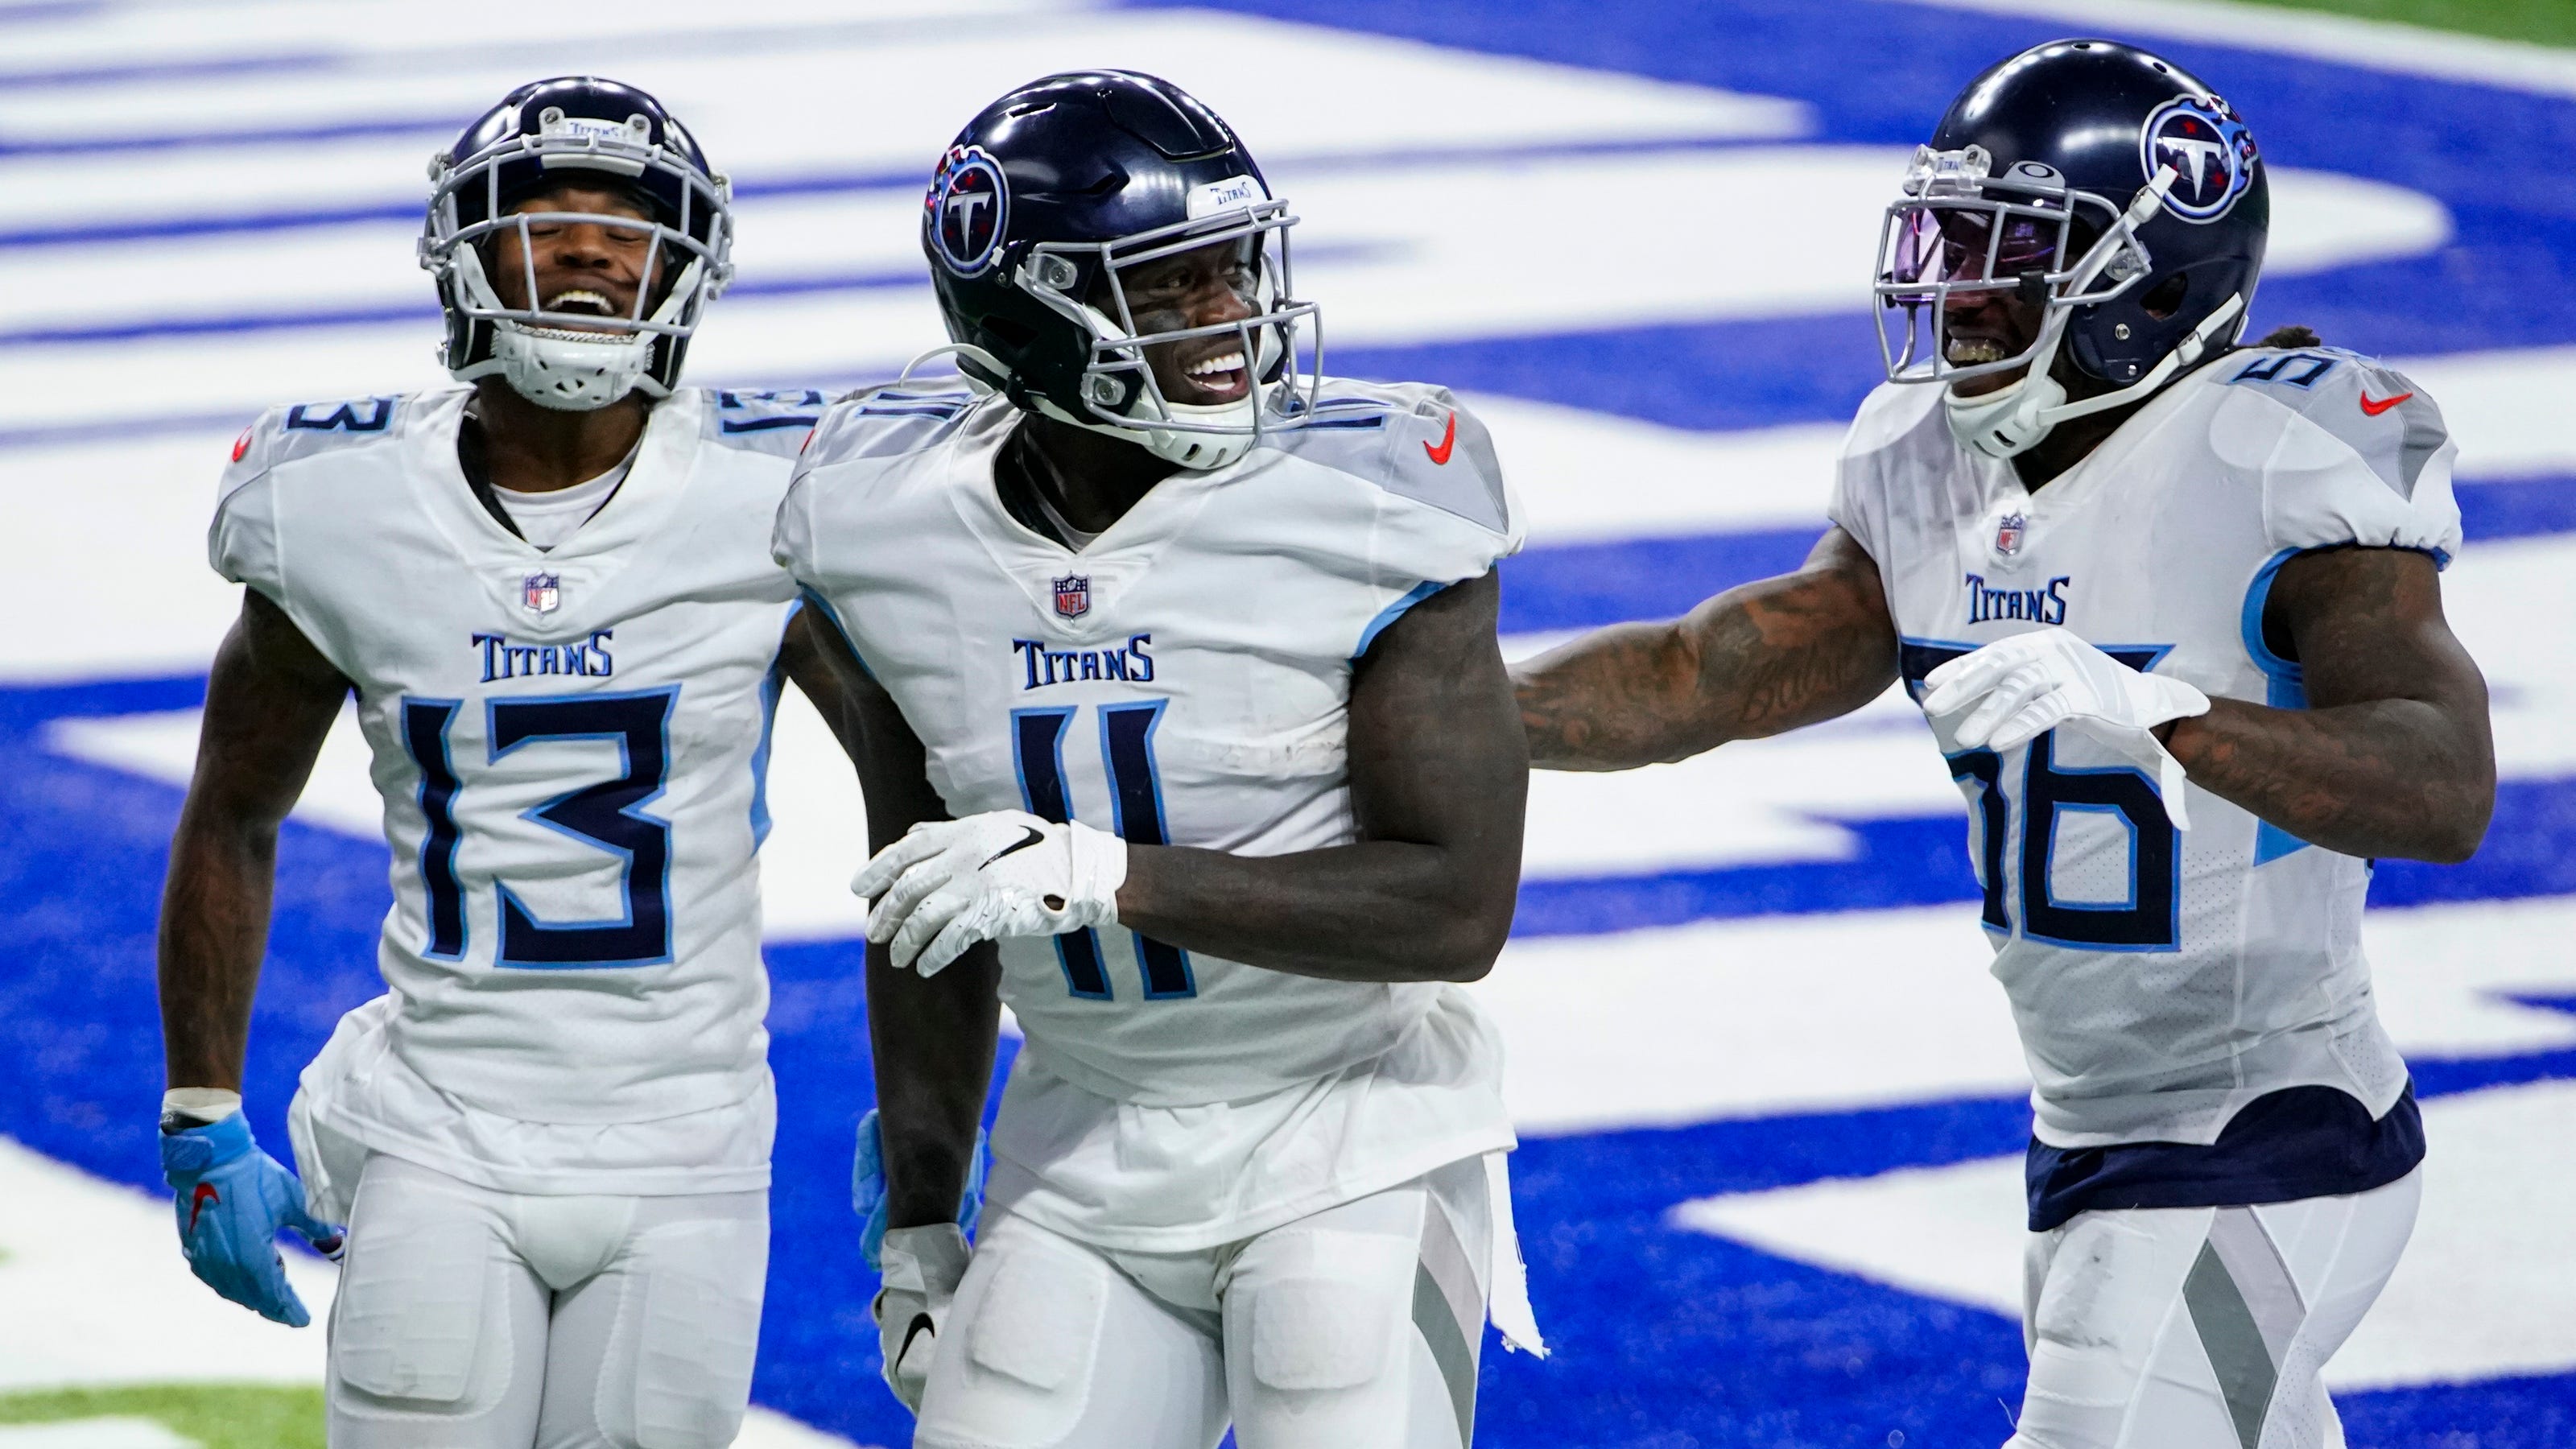 NFL playoff picture after Week 12: Titans take control in AFC South - USA TODAY